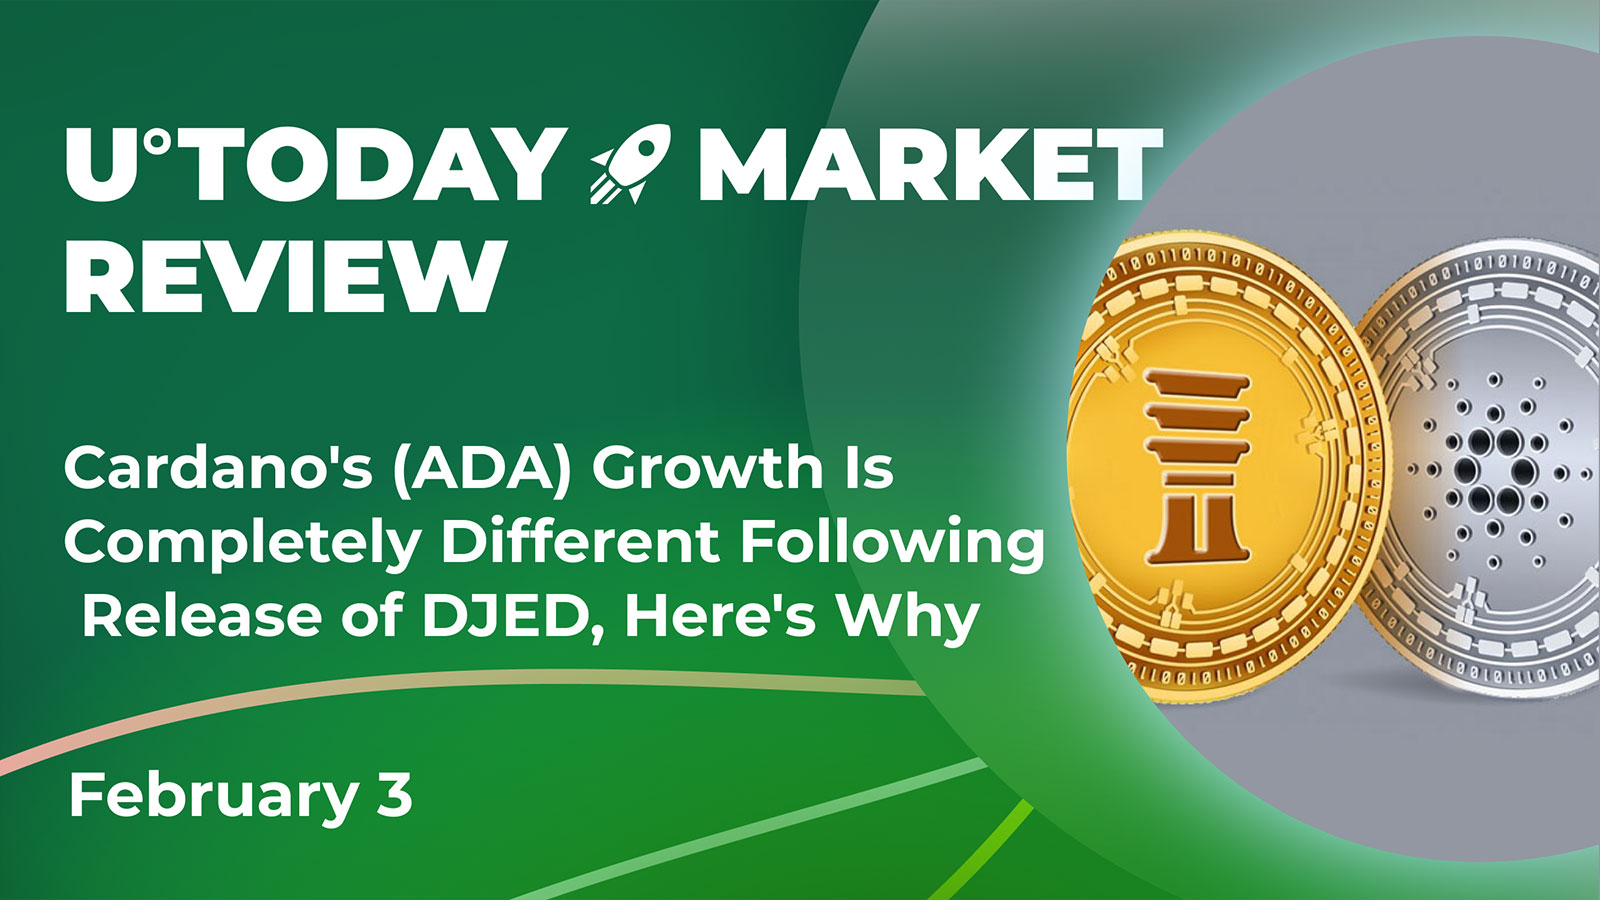 Cardano's (ADA) Growth Is Completely Different Following Release of DJED, Here's Why